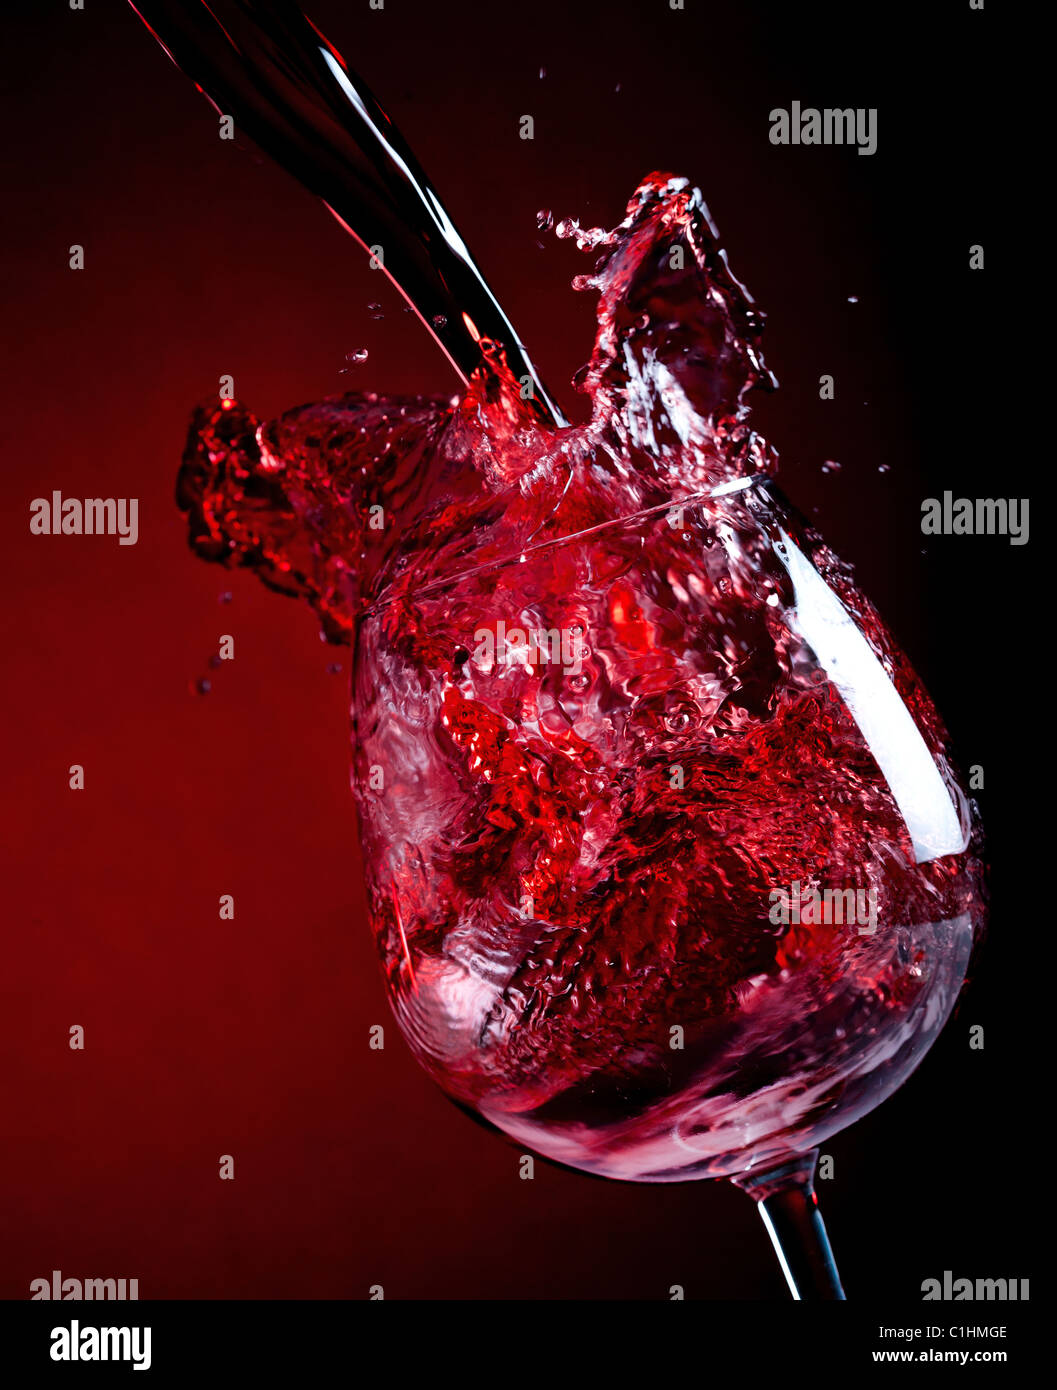 Red wine pouring down into a wine glass Stock Photo